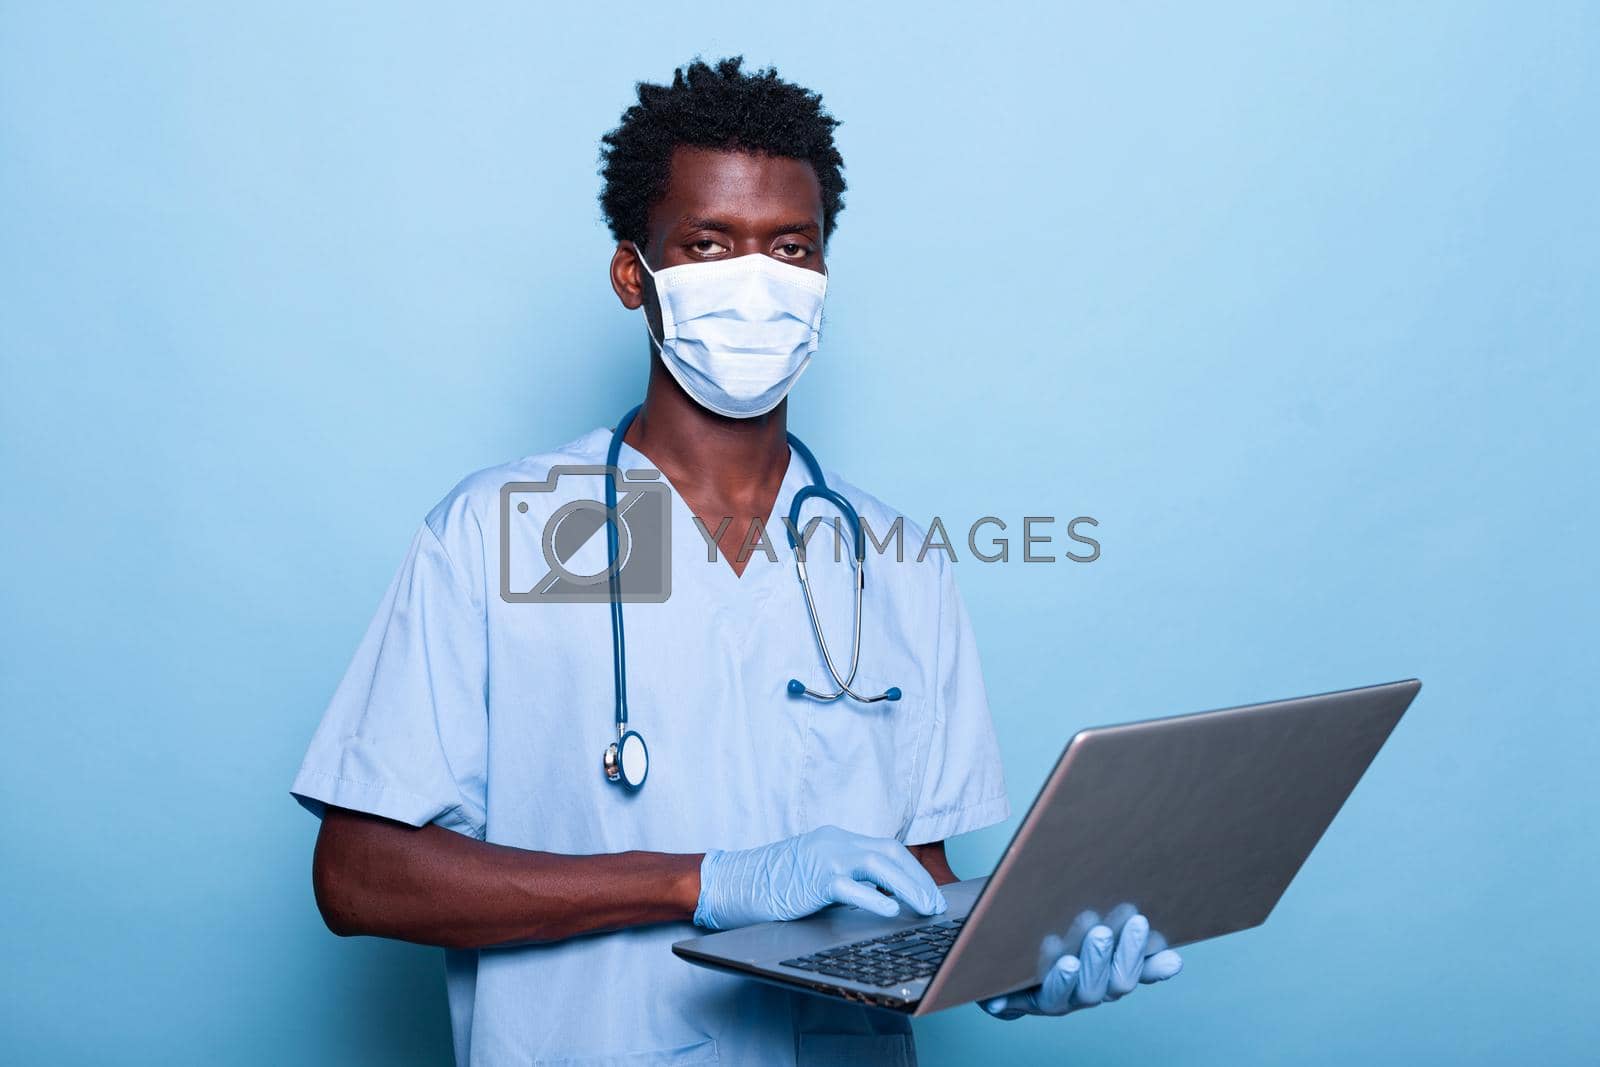 Healthcare specialist with laptop in hand looking at camera. Medical nurse with stethoscope and blue uniform wearing face mask against coronavirus pandemic. Assistant with gloves